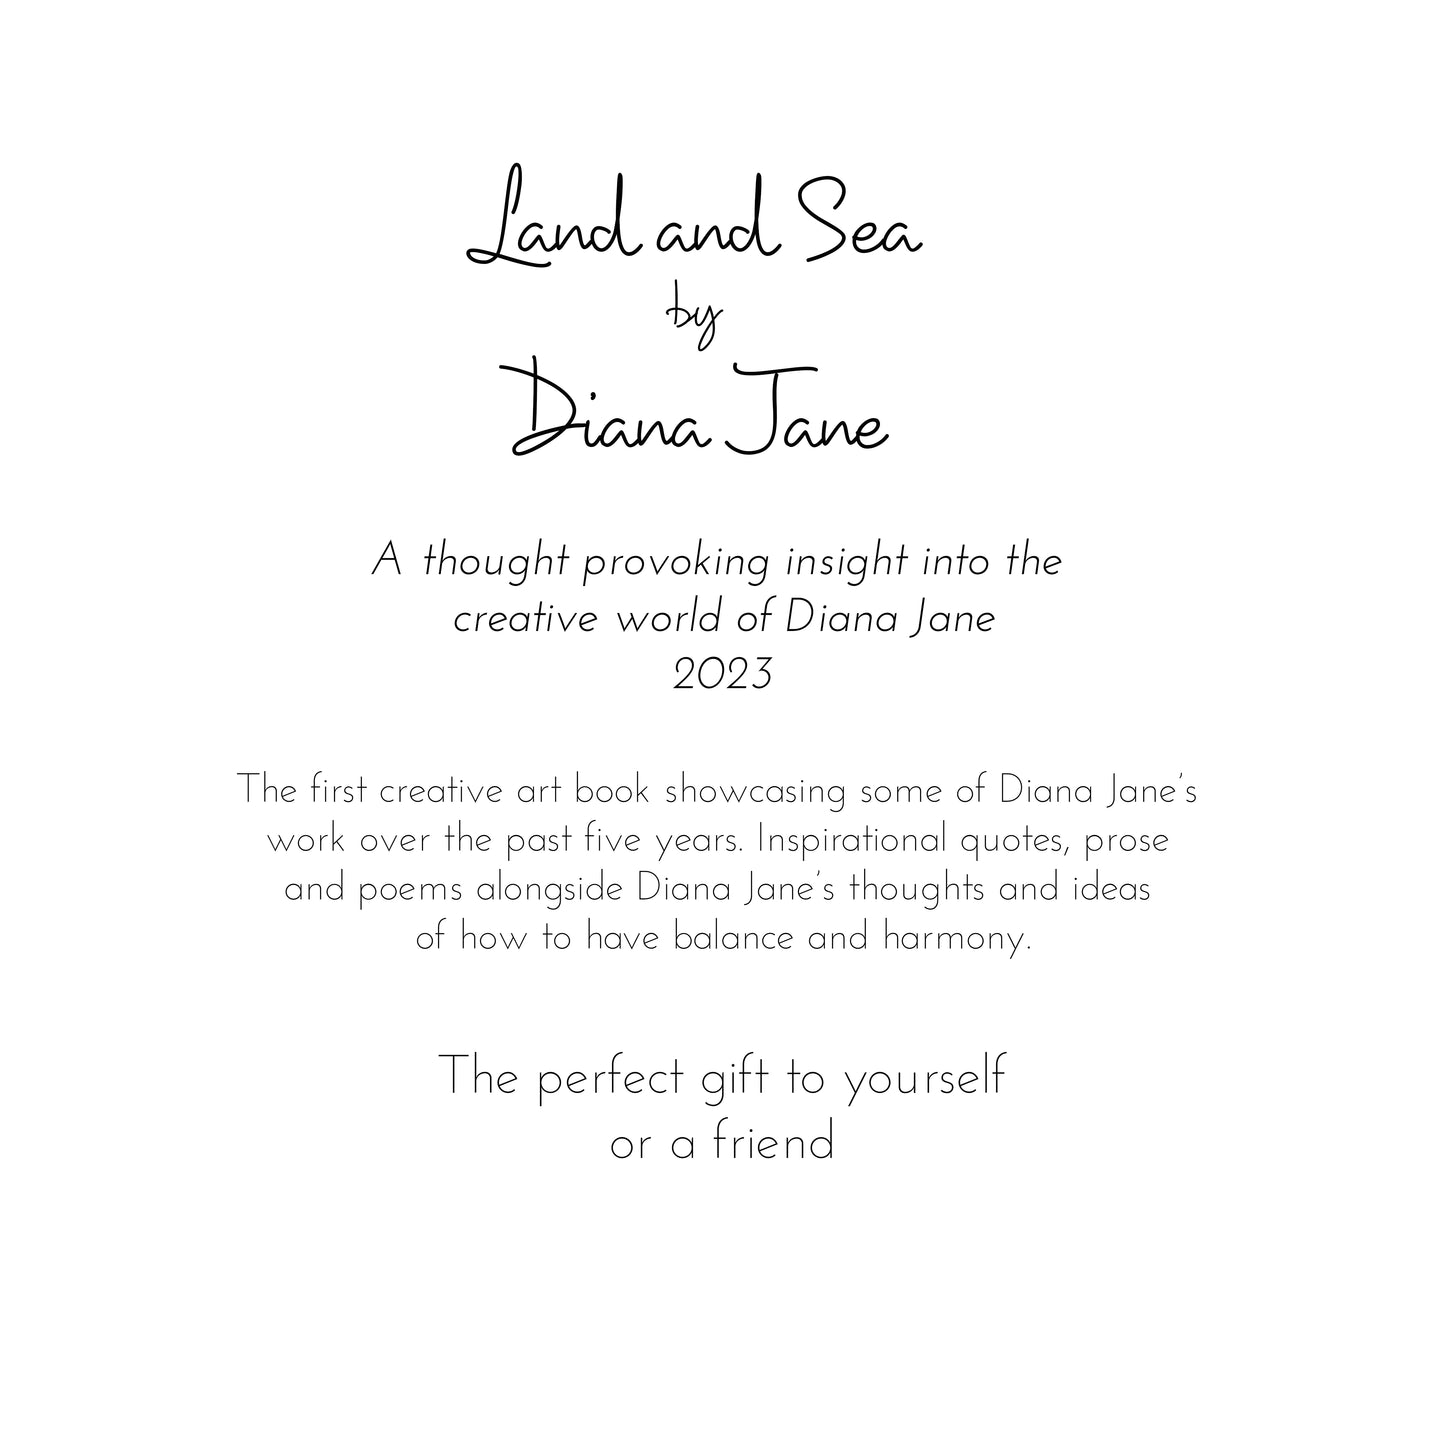 Land and Sea - The new art book by Diana Jane